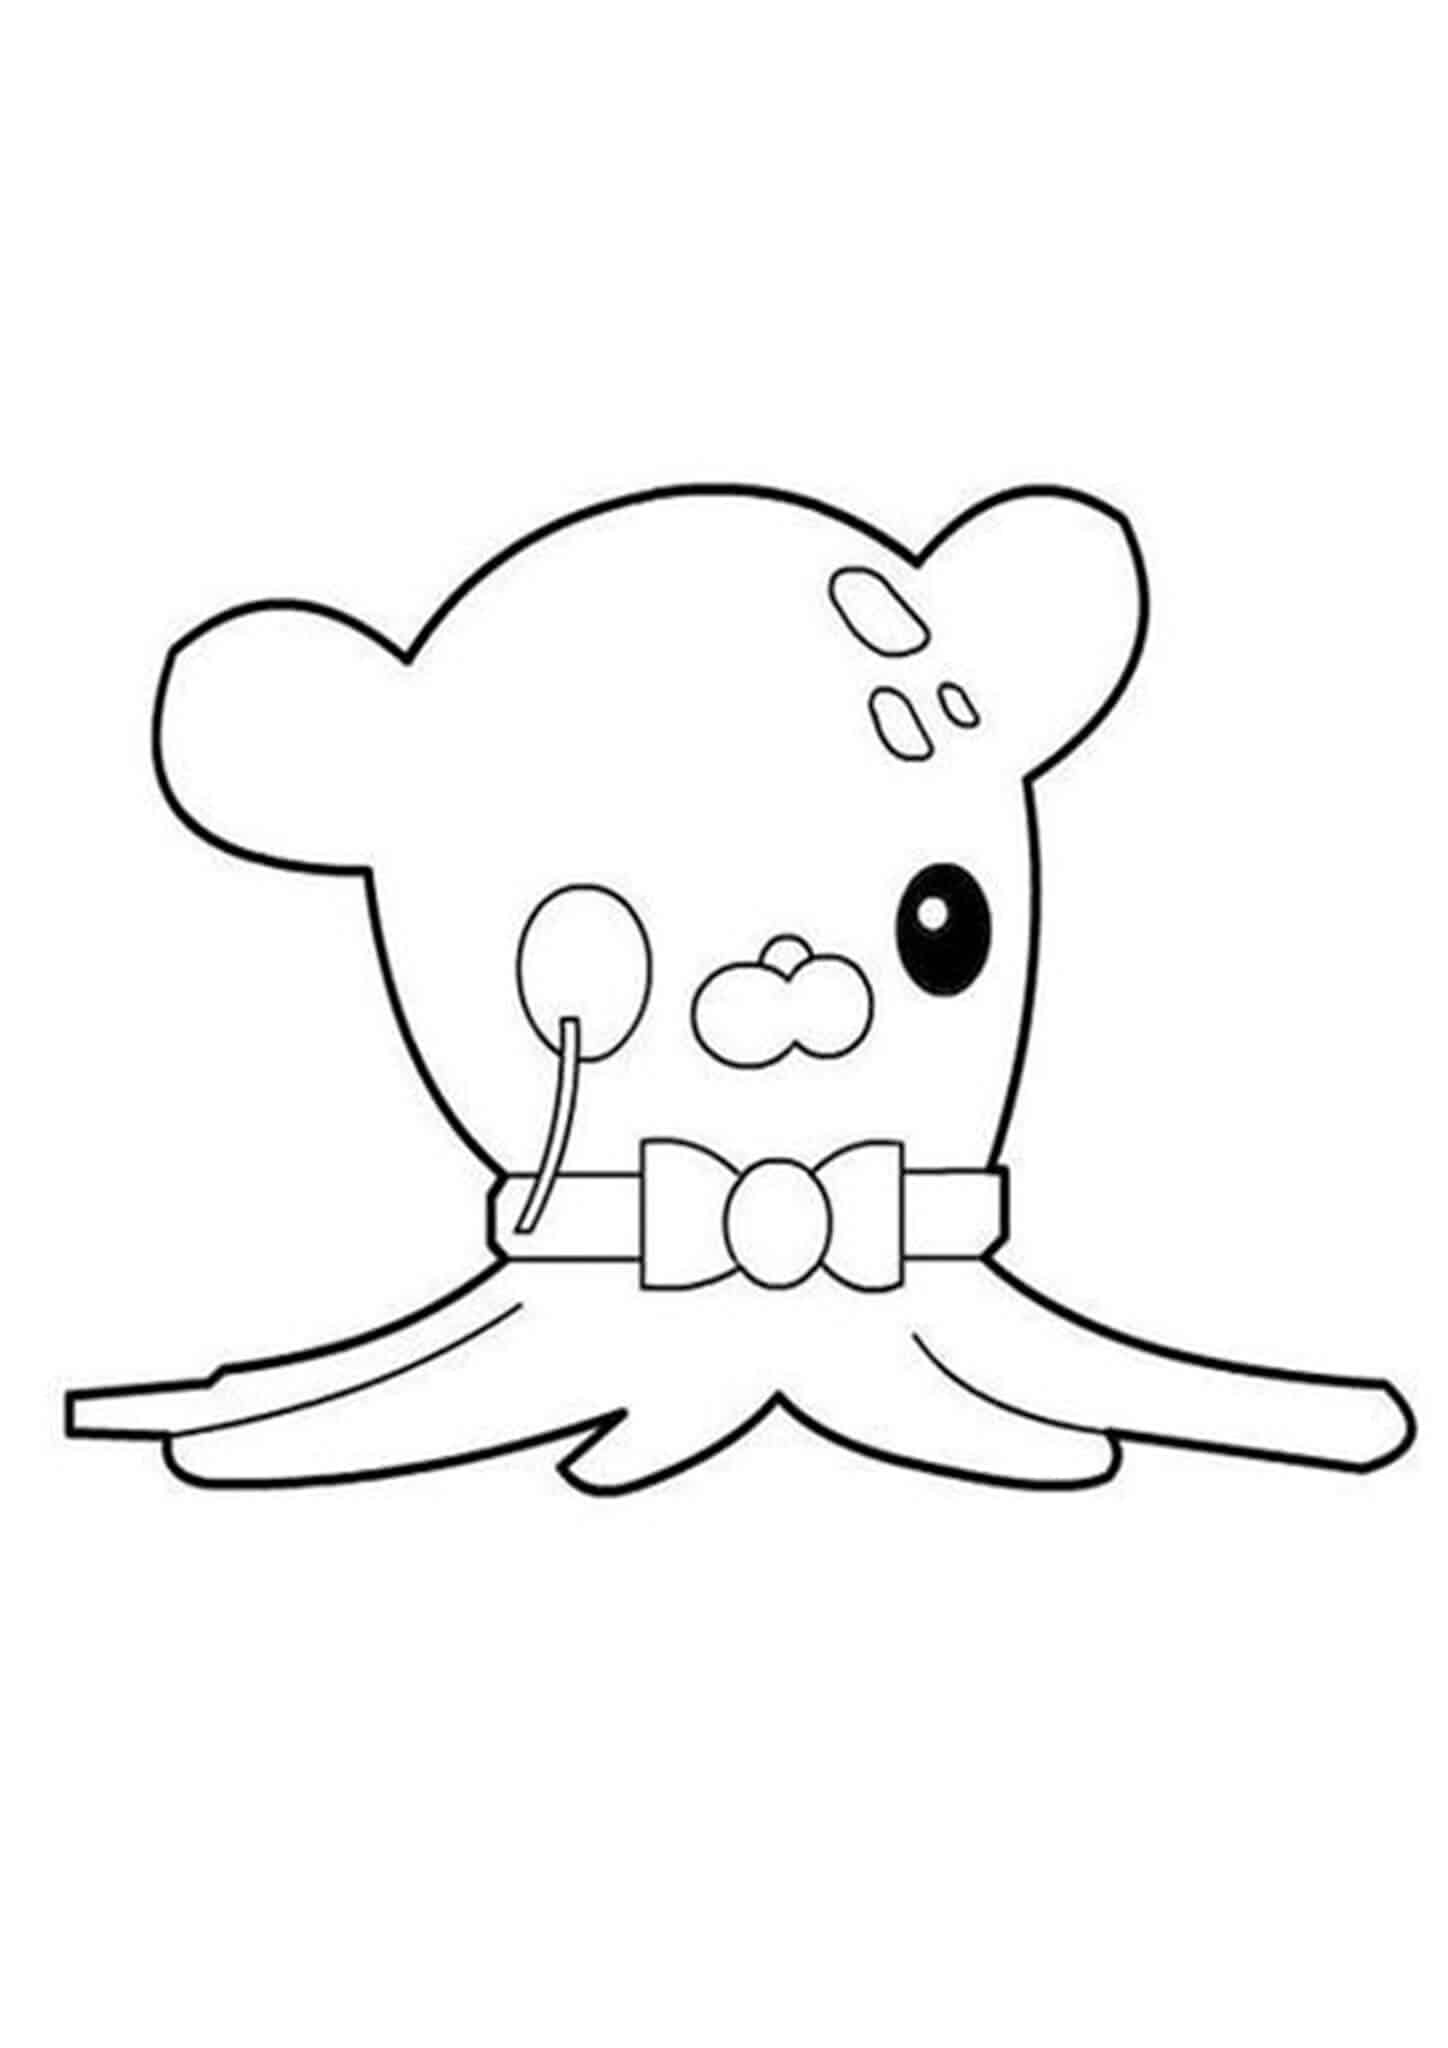 Free easy to print octonauts coloring pages